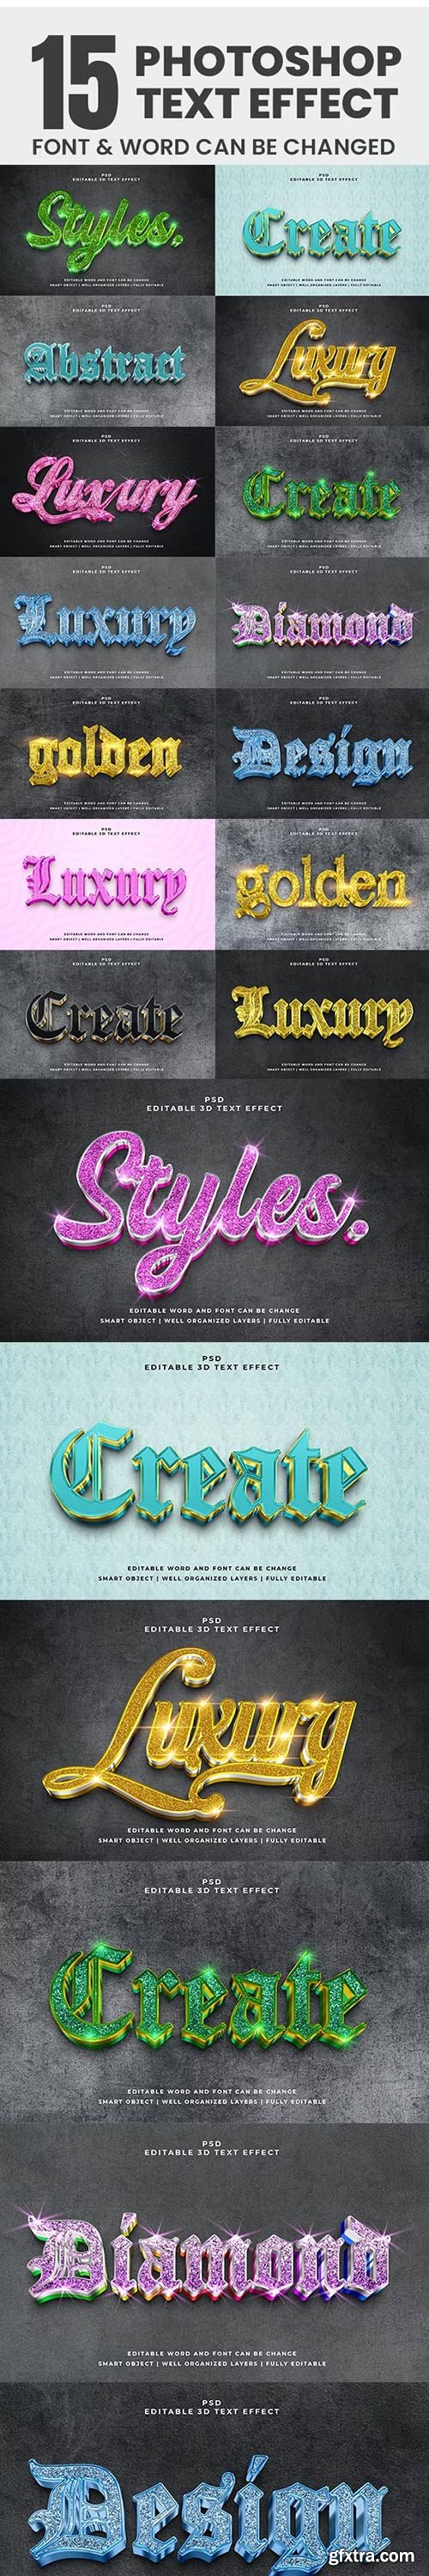 Graphicriver - 15 Photoshop Editable 3d Text Effect Style Pack 44461597